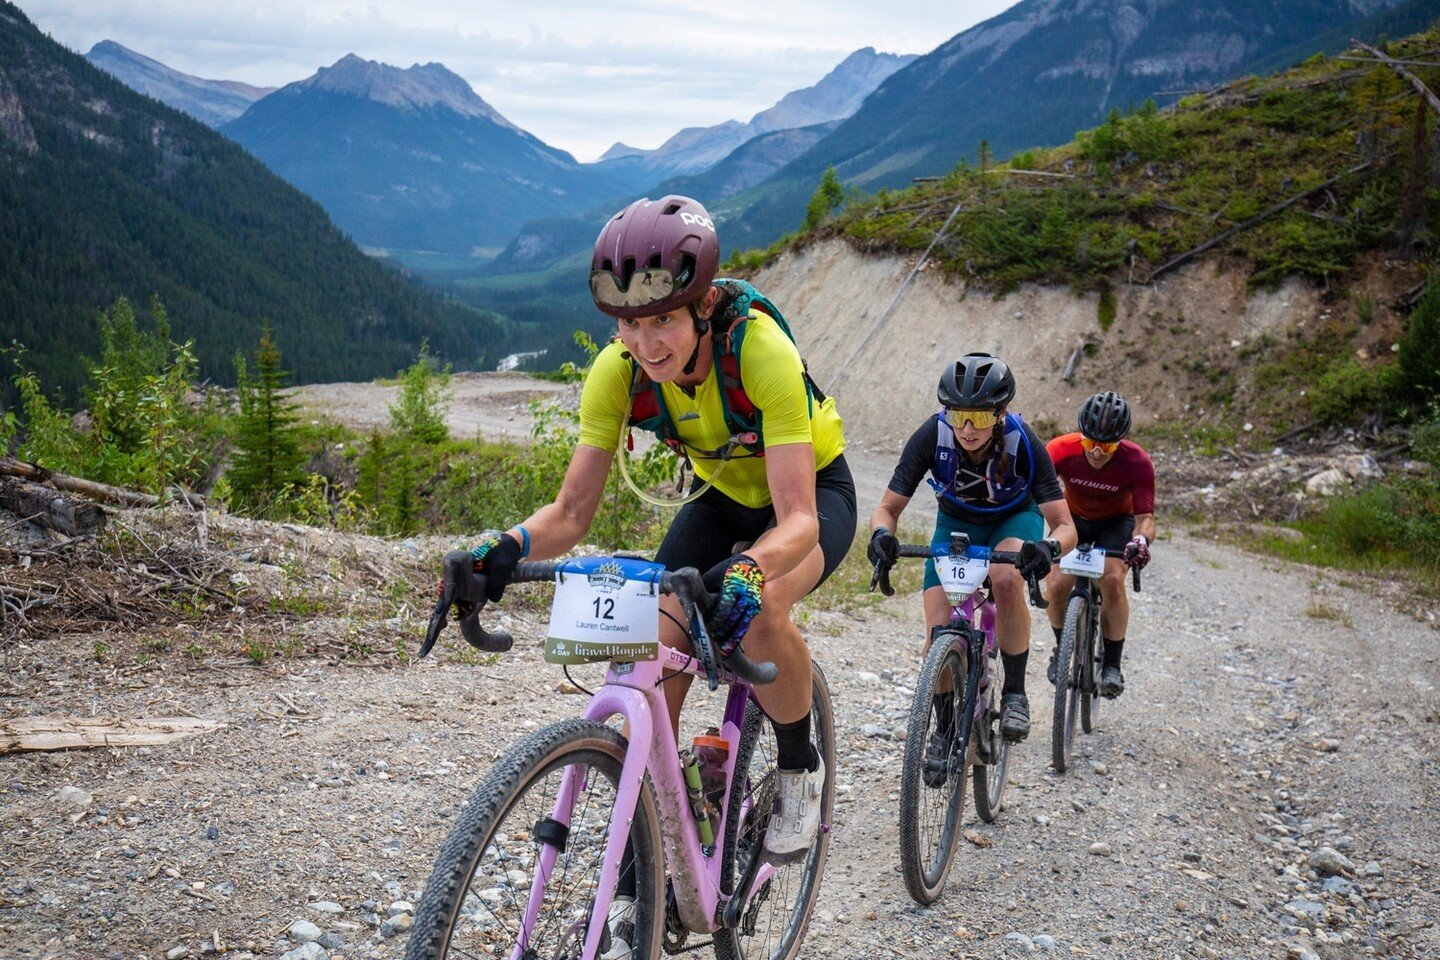 Are you ready for an epic adventure? Join us at the TransRockies Gravel Royale August 28-31!⁠
⁠
Here are a few reasons why you should get excited and stoked for this amazing event:⁠
⁠
🏞️ Stunning Scenery - Enjoy breathtaking views of the Canadian Ro